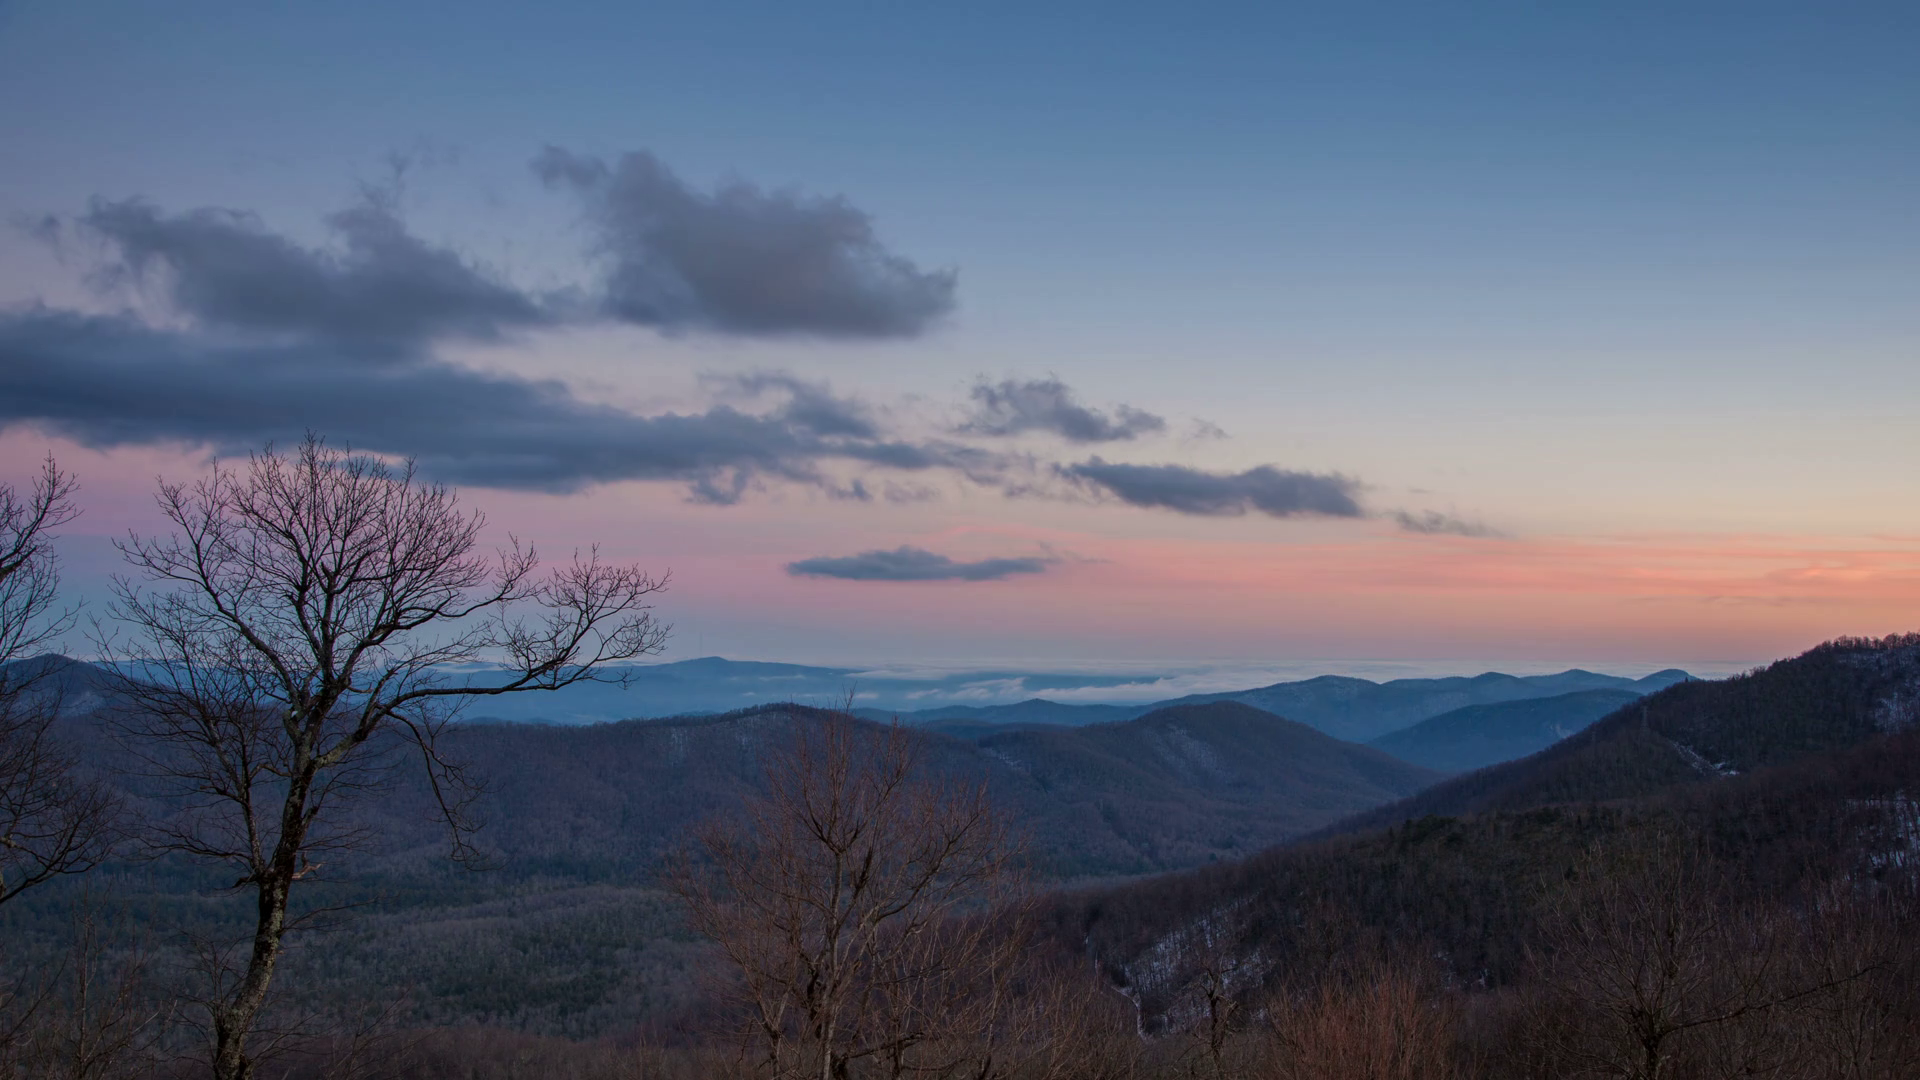 Dusk Timelapse of the Blue Ridge Mountain Landscape with Forming ...